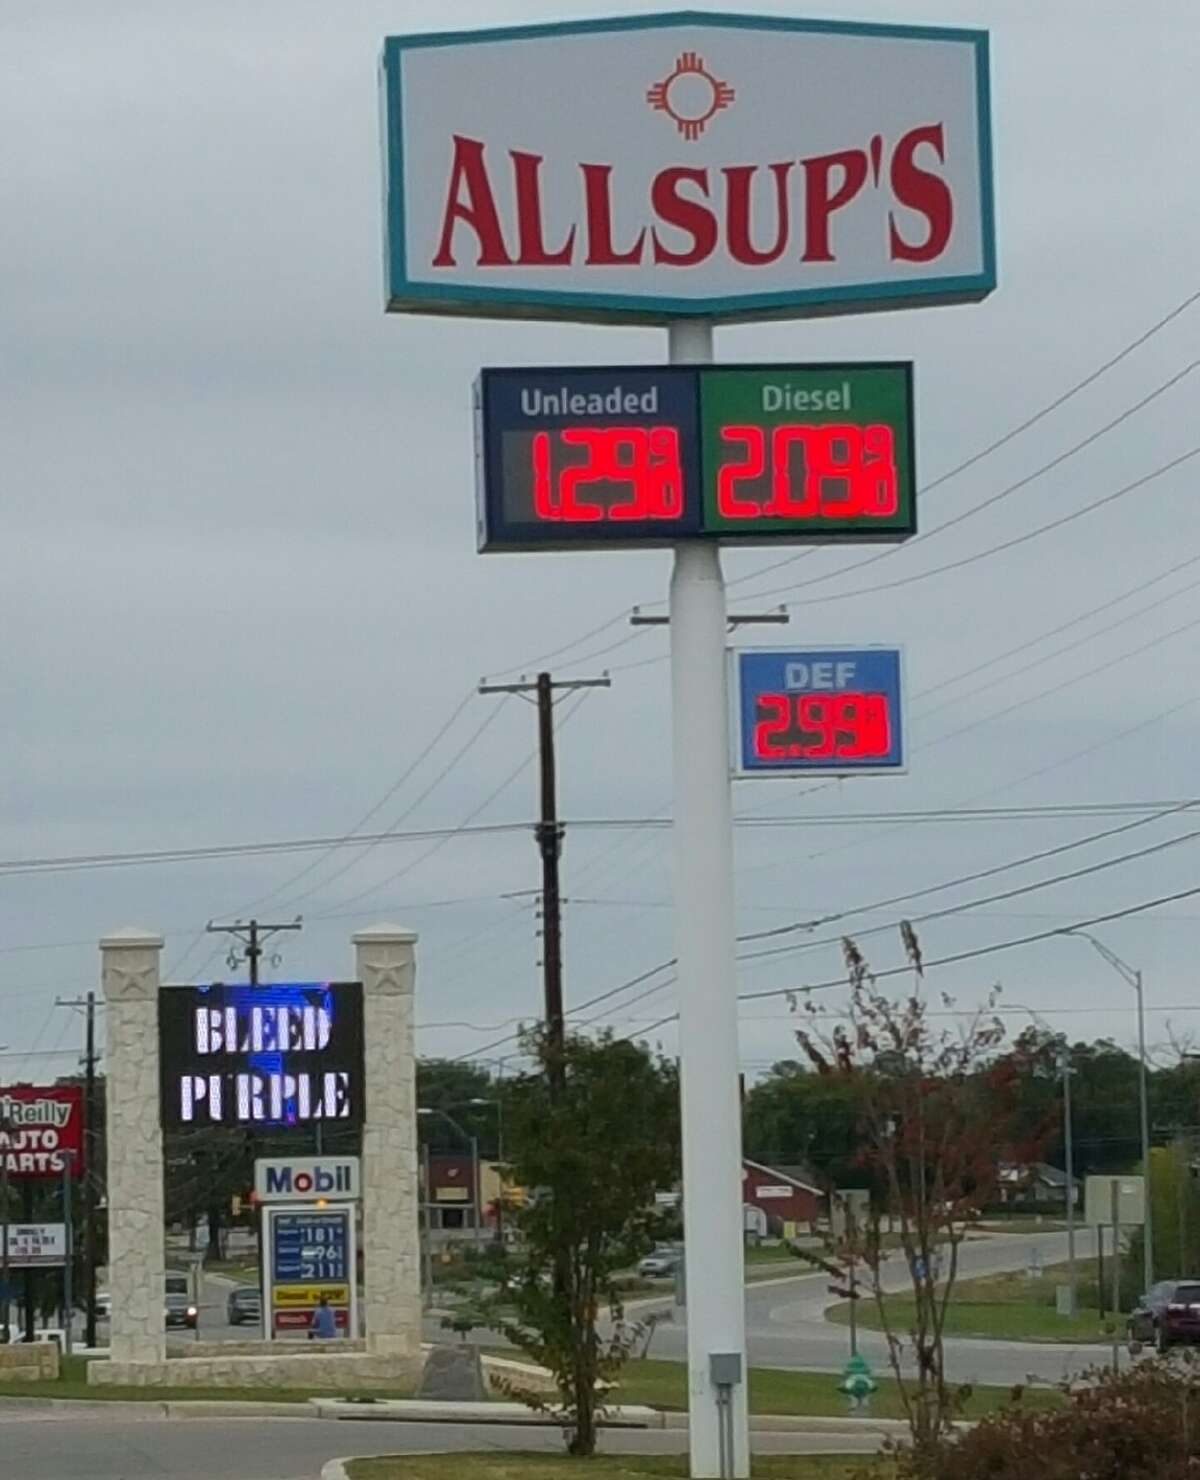 A gas station located at 2725 W Washington St. in Stephenville, Texas sells a gallon of unleaded gasoline for $1.29 on Nov. 9, 2015.